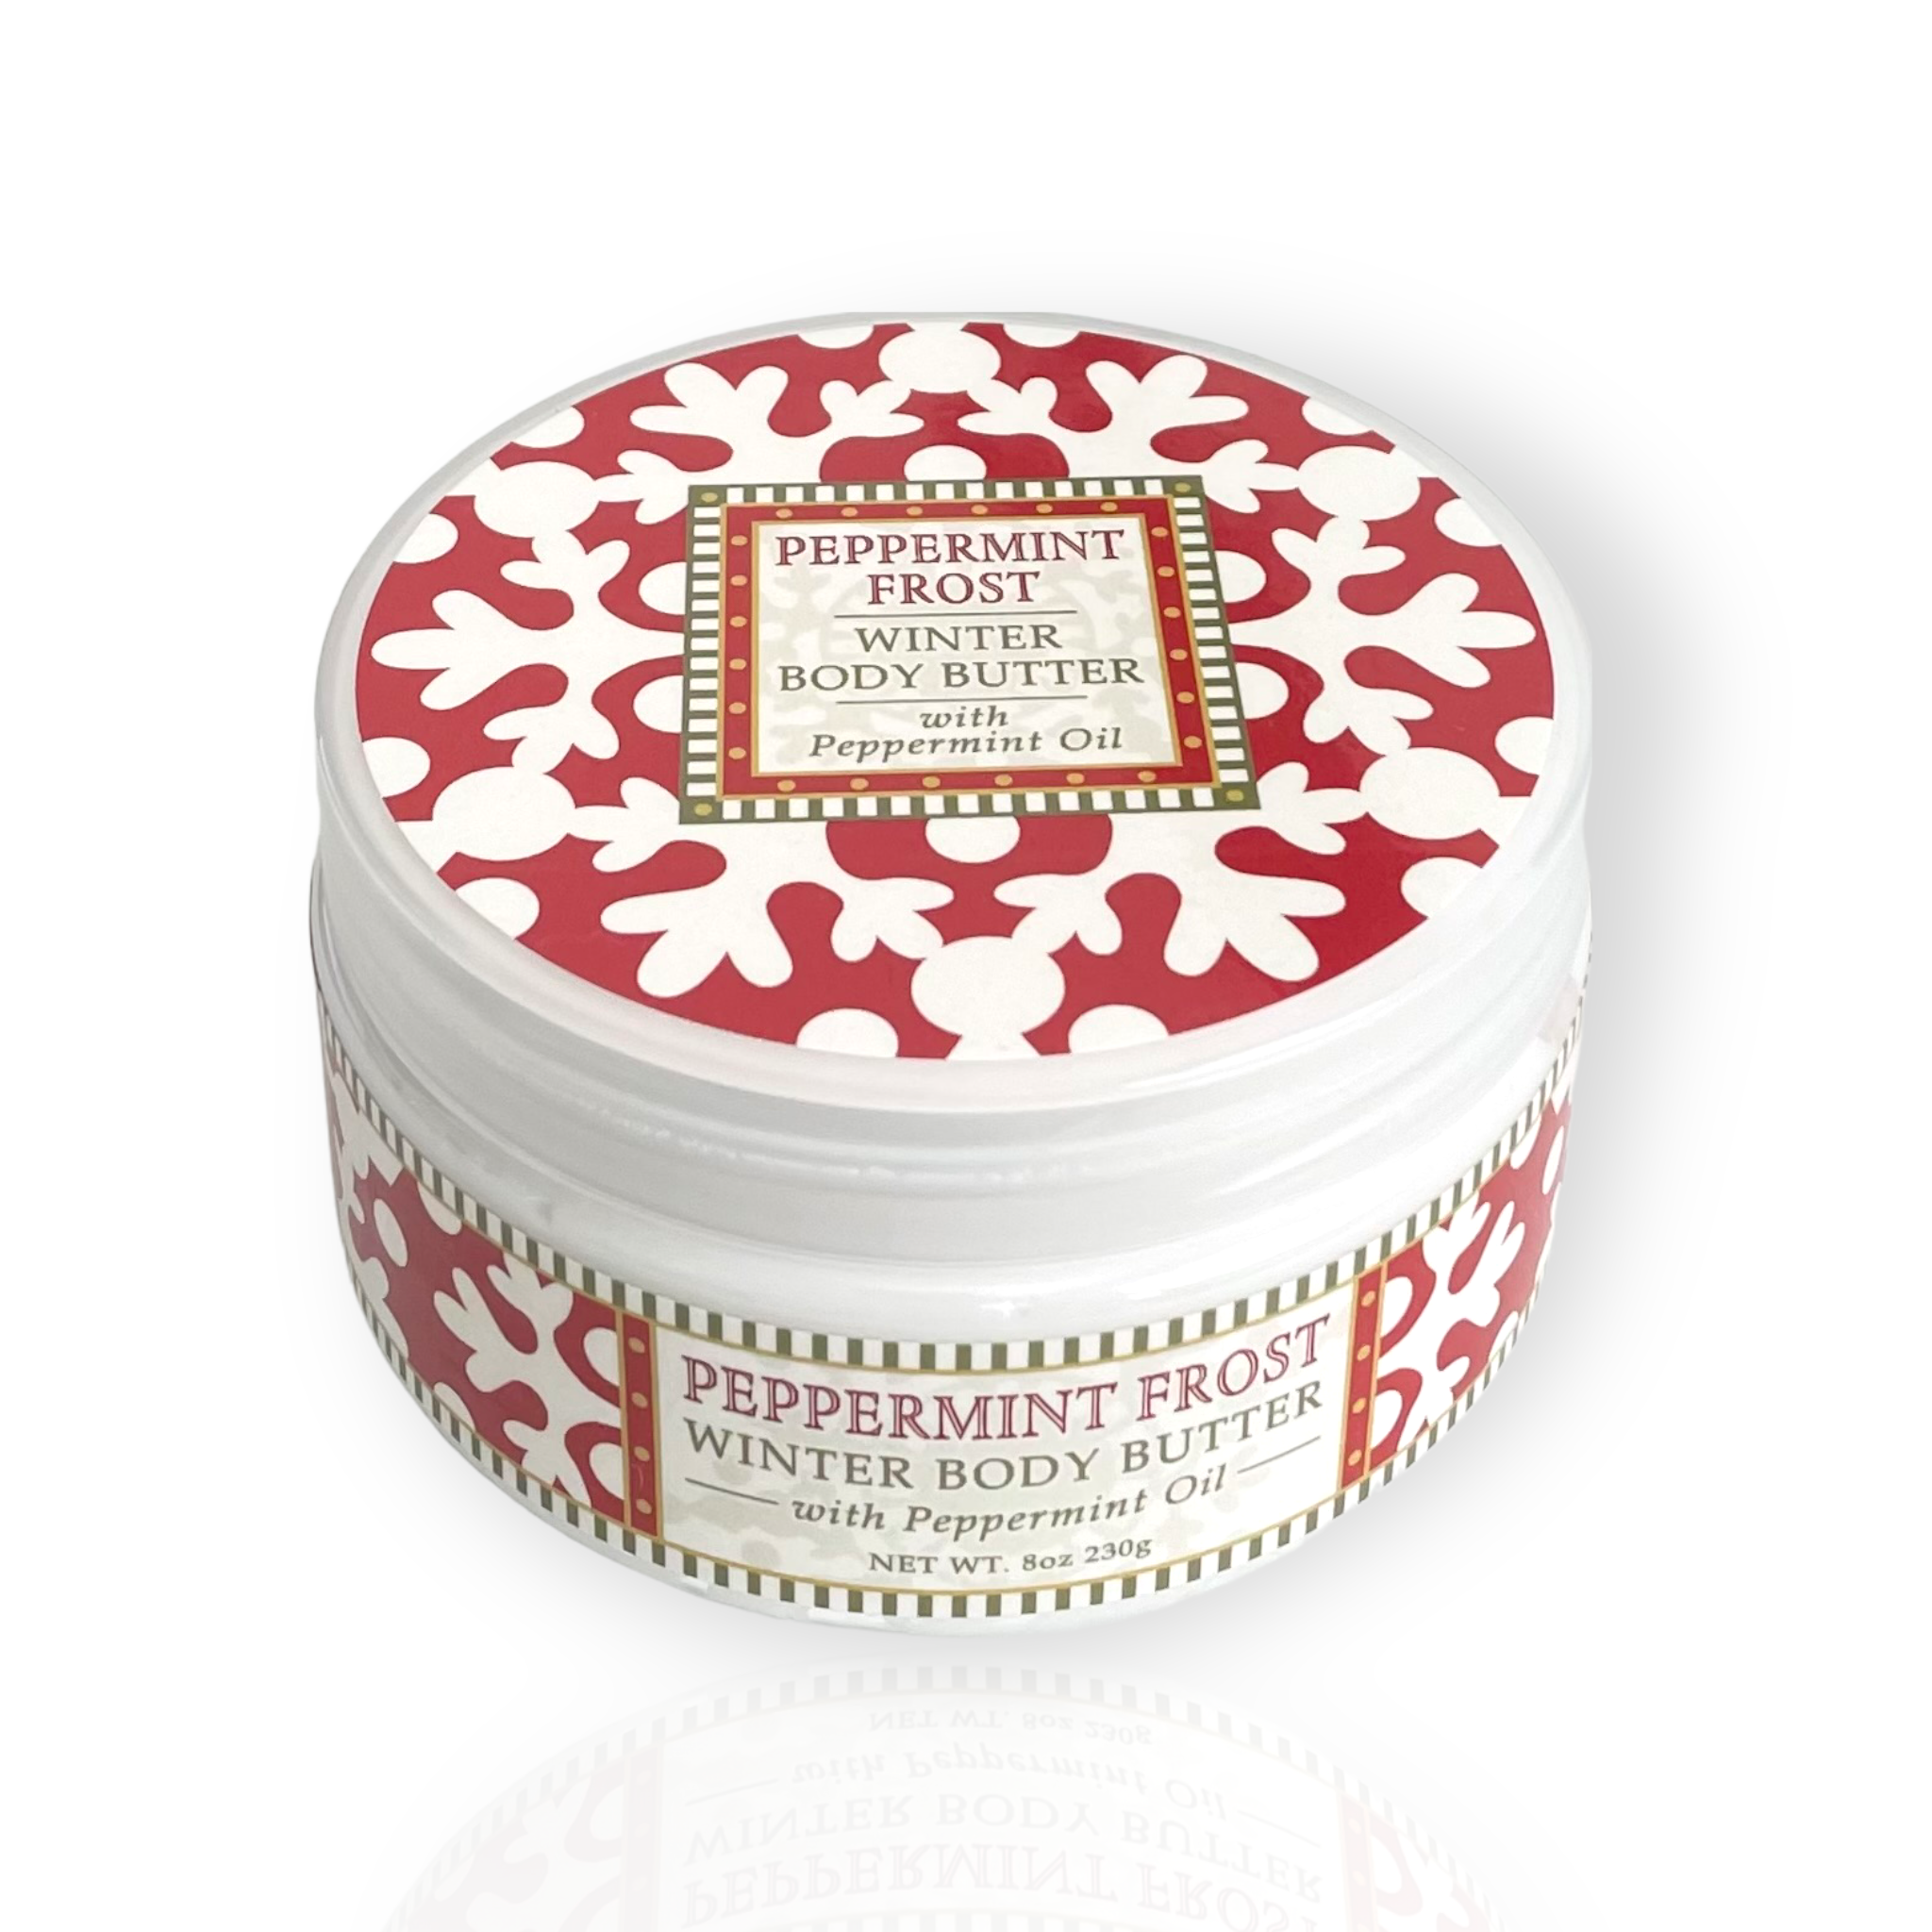 Greenwich Bay Trading Company Peppermint Frost Collection Body Butter